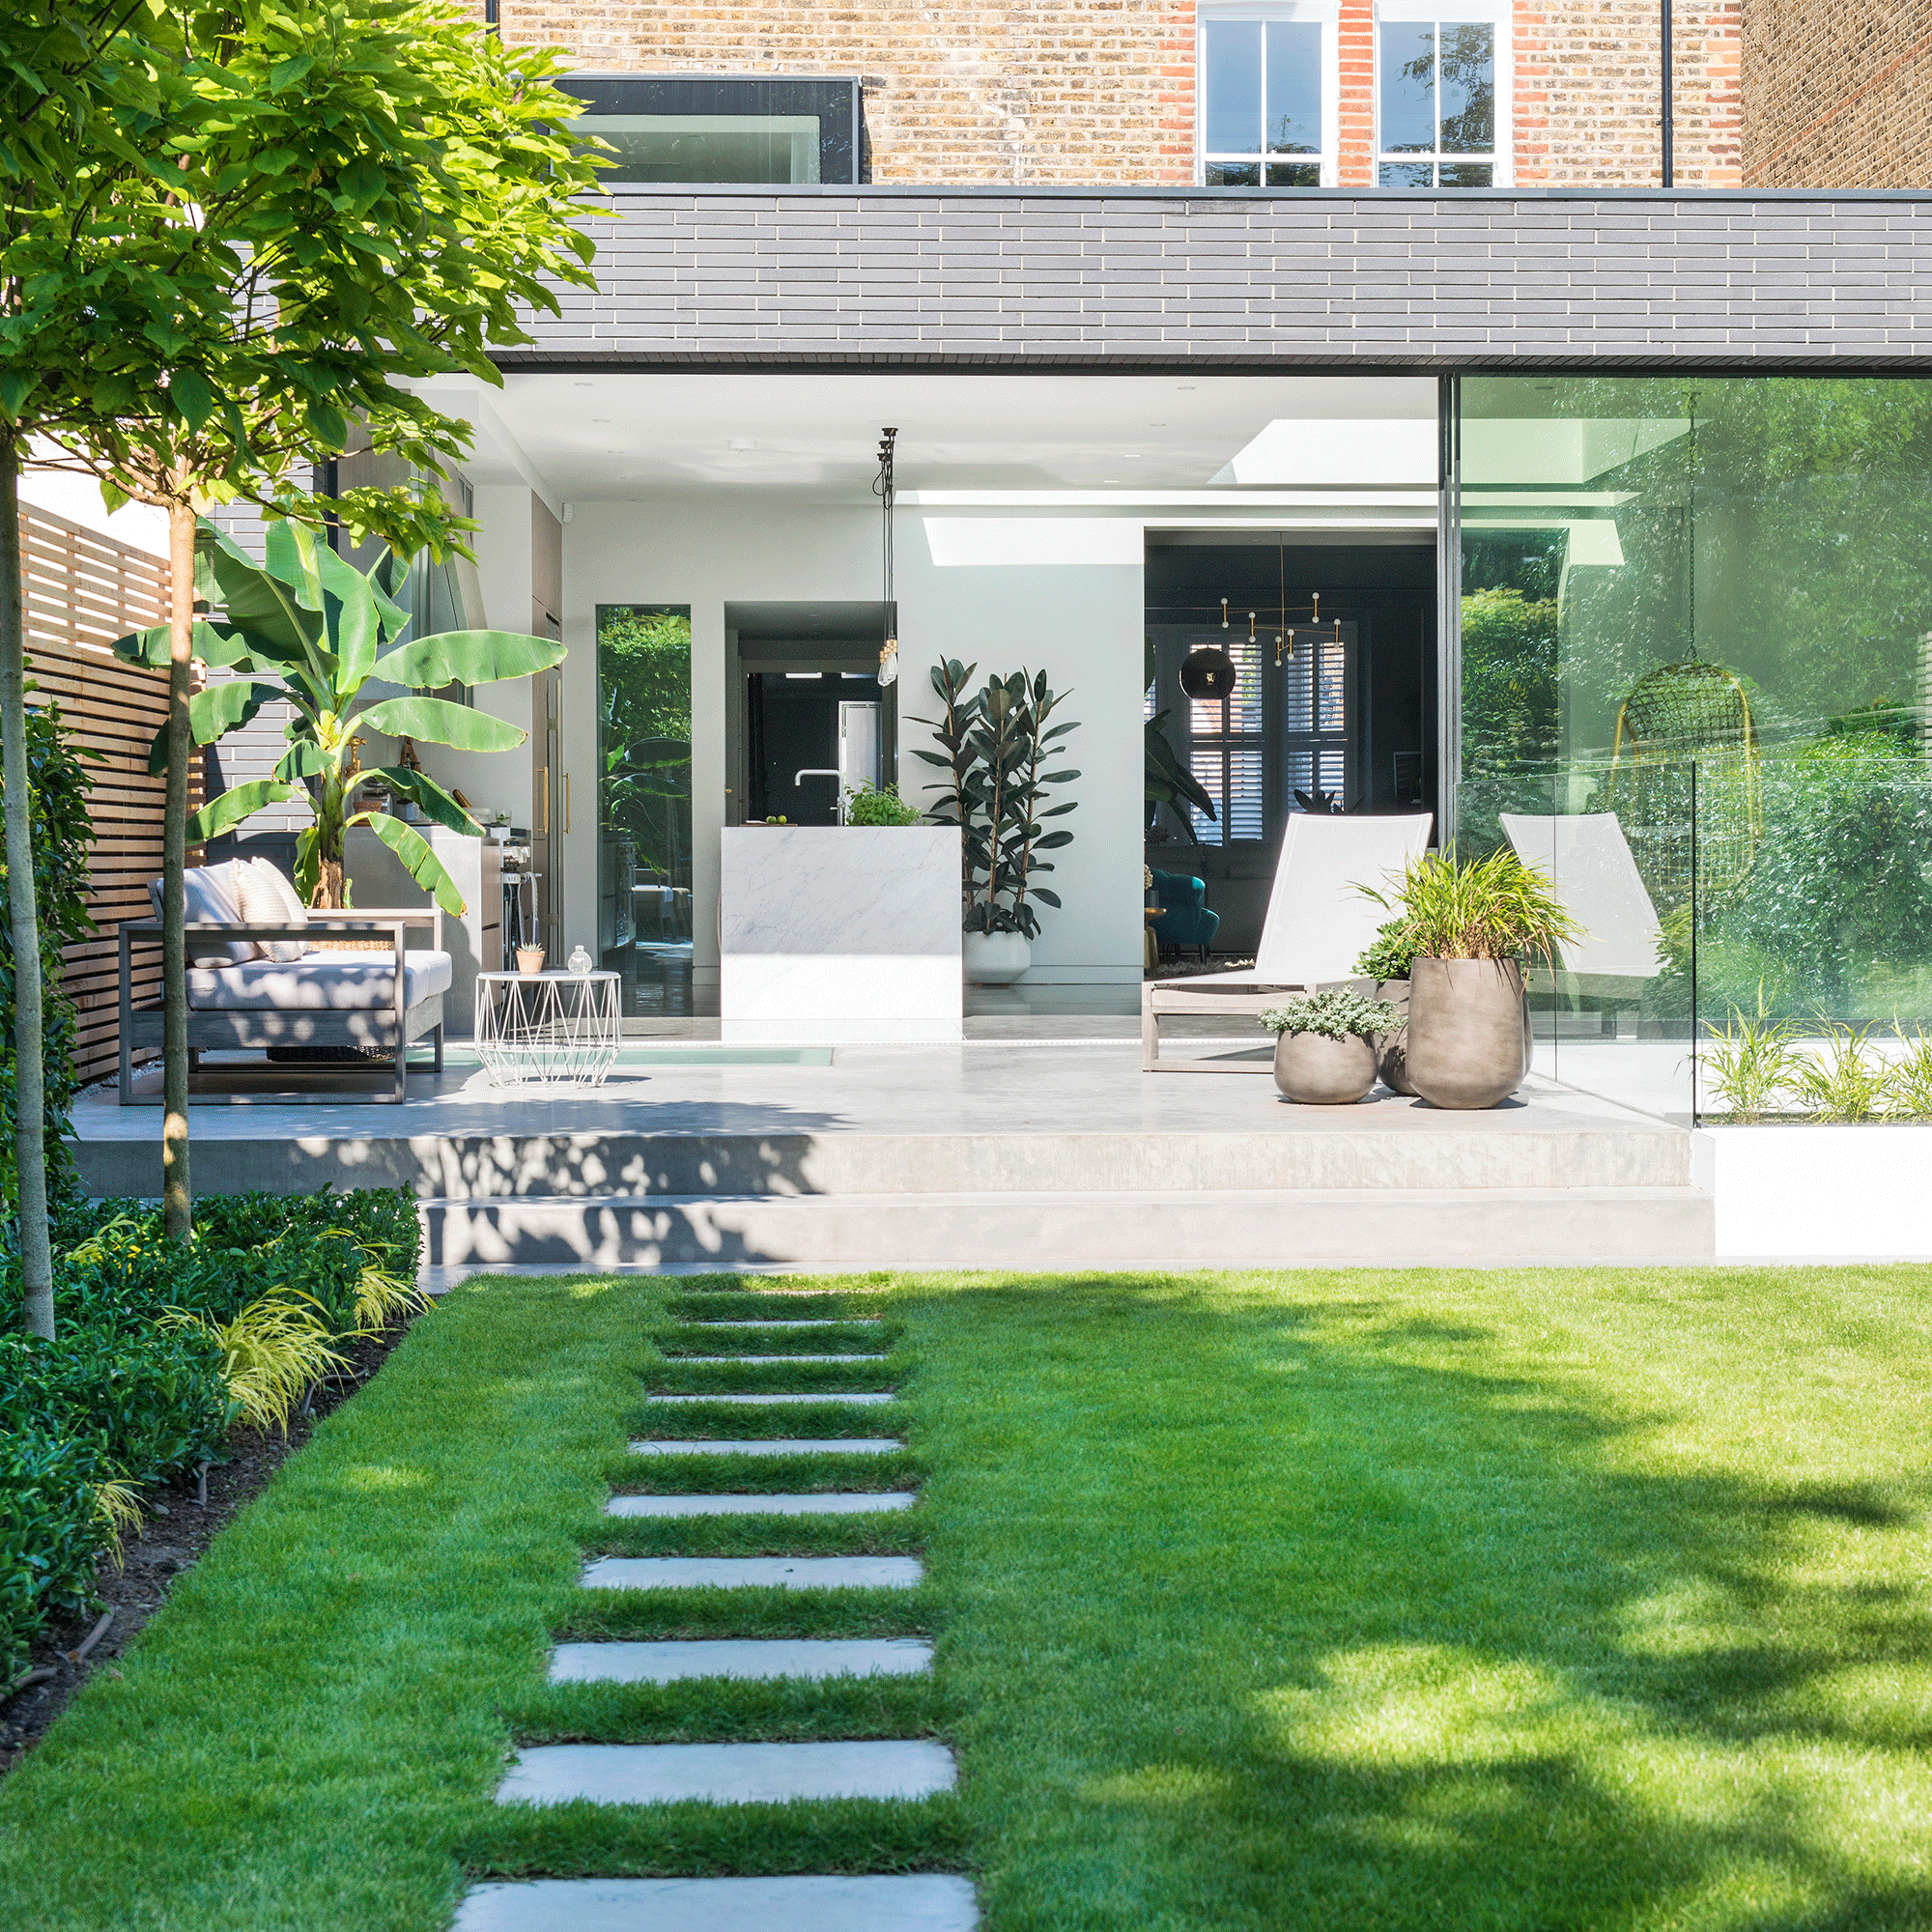 How to plan a garden - the essential guide for designing your dream garden